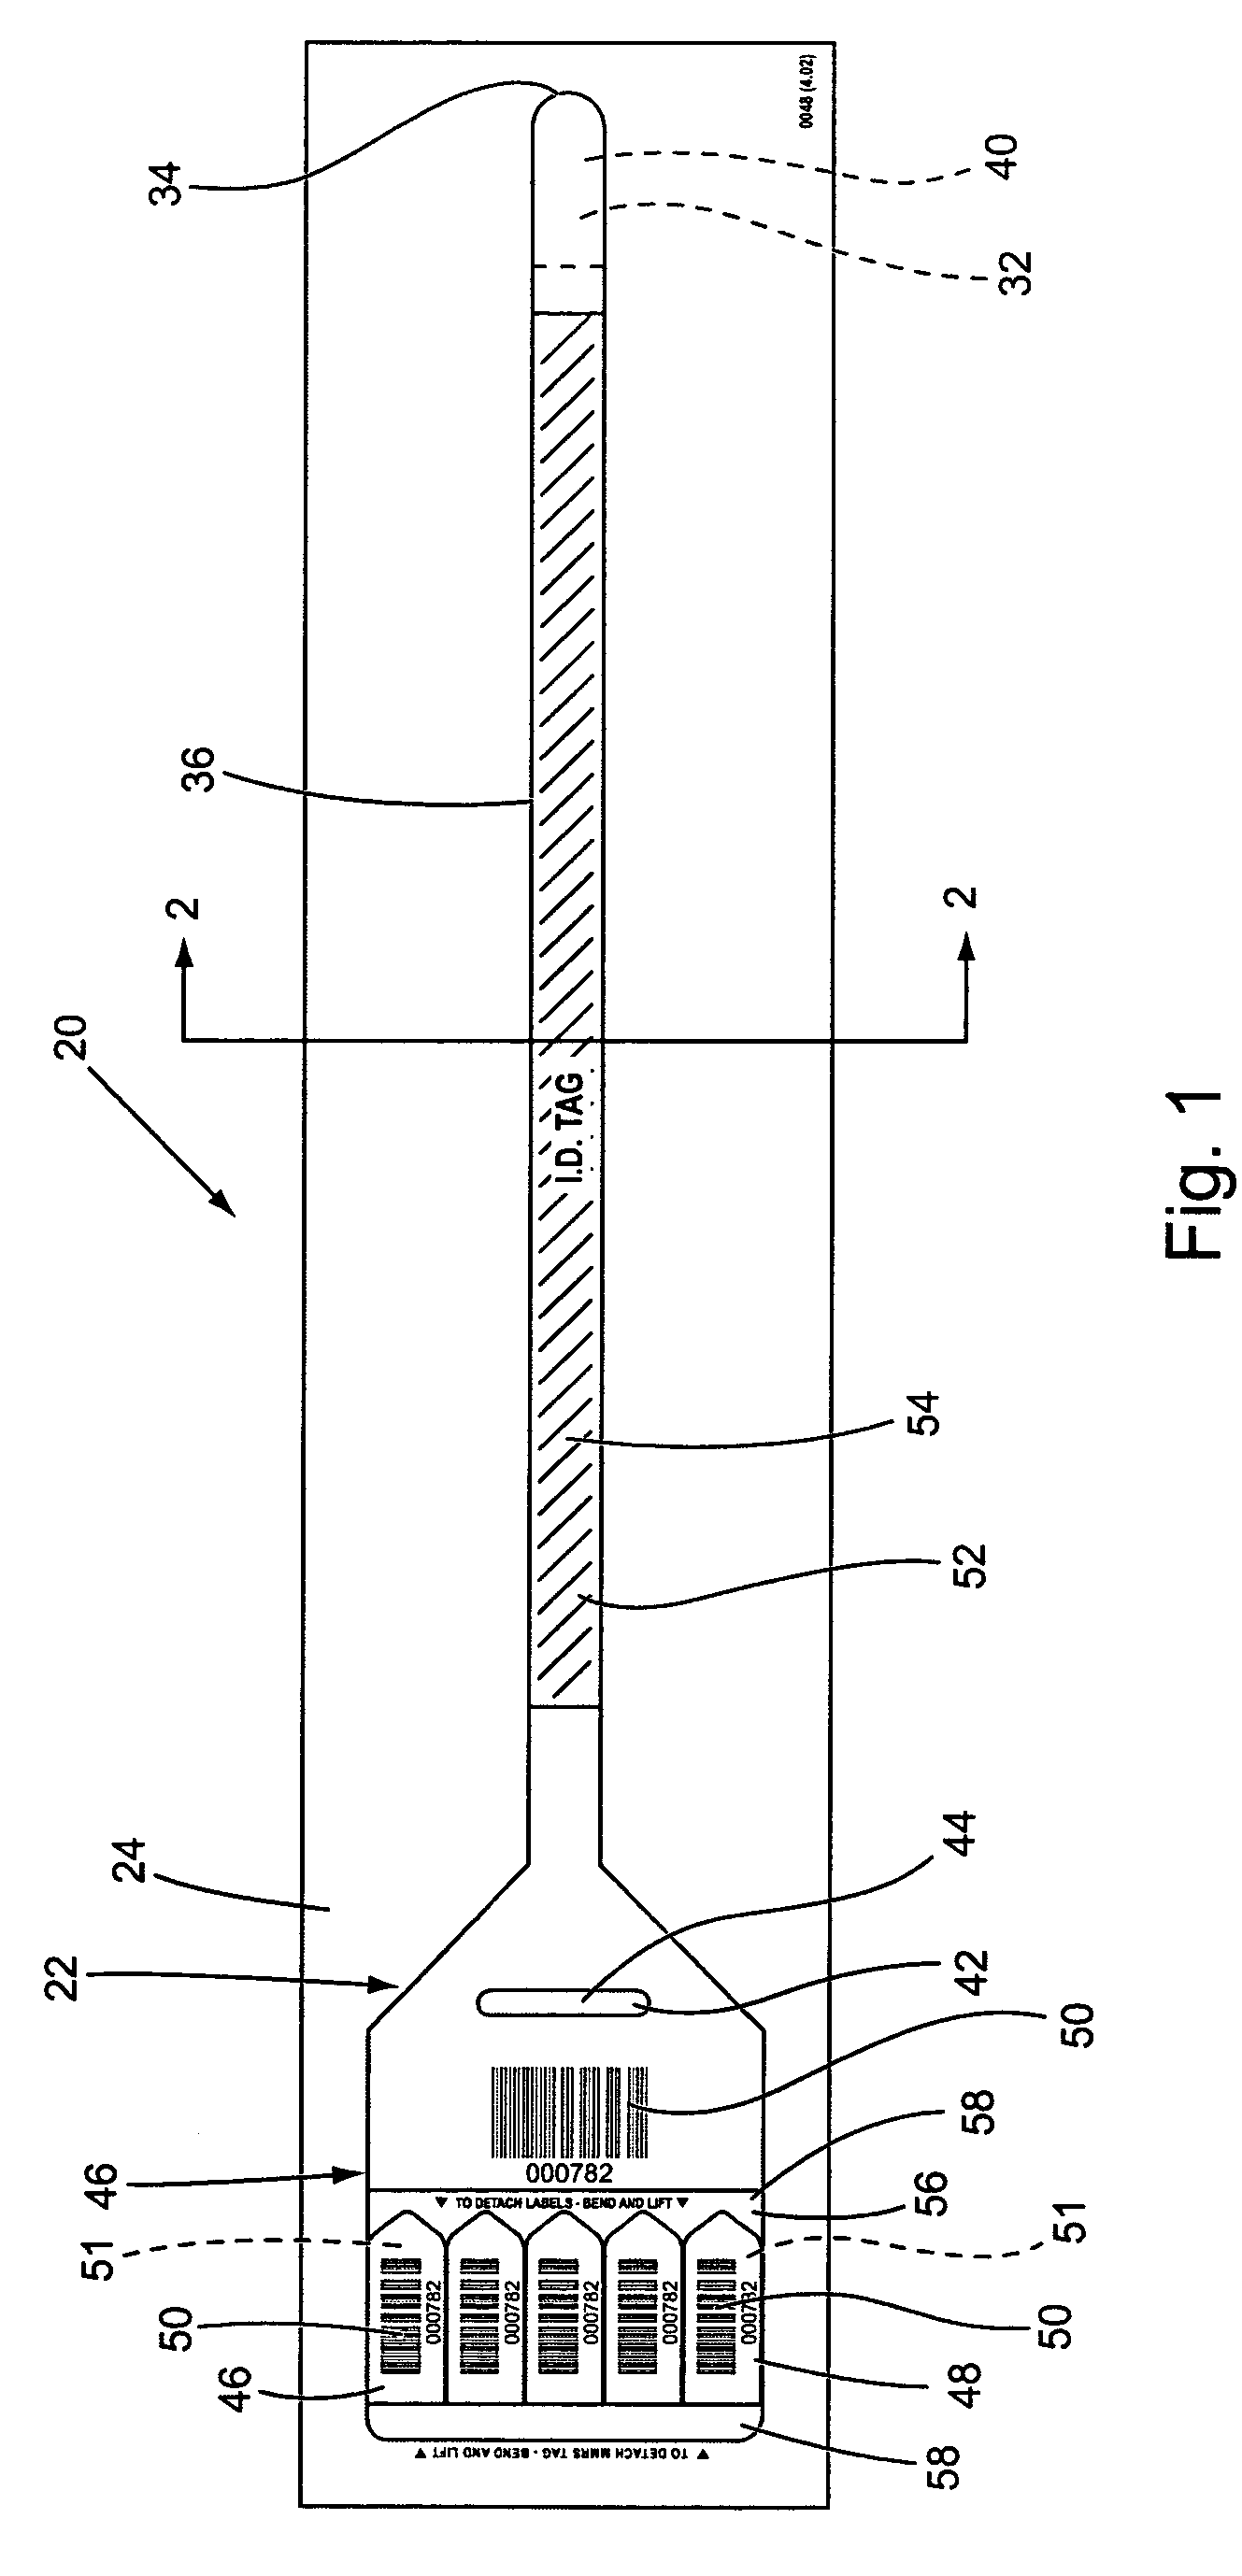 Wristband/cinch with inboard label assembly business form and method